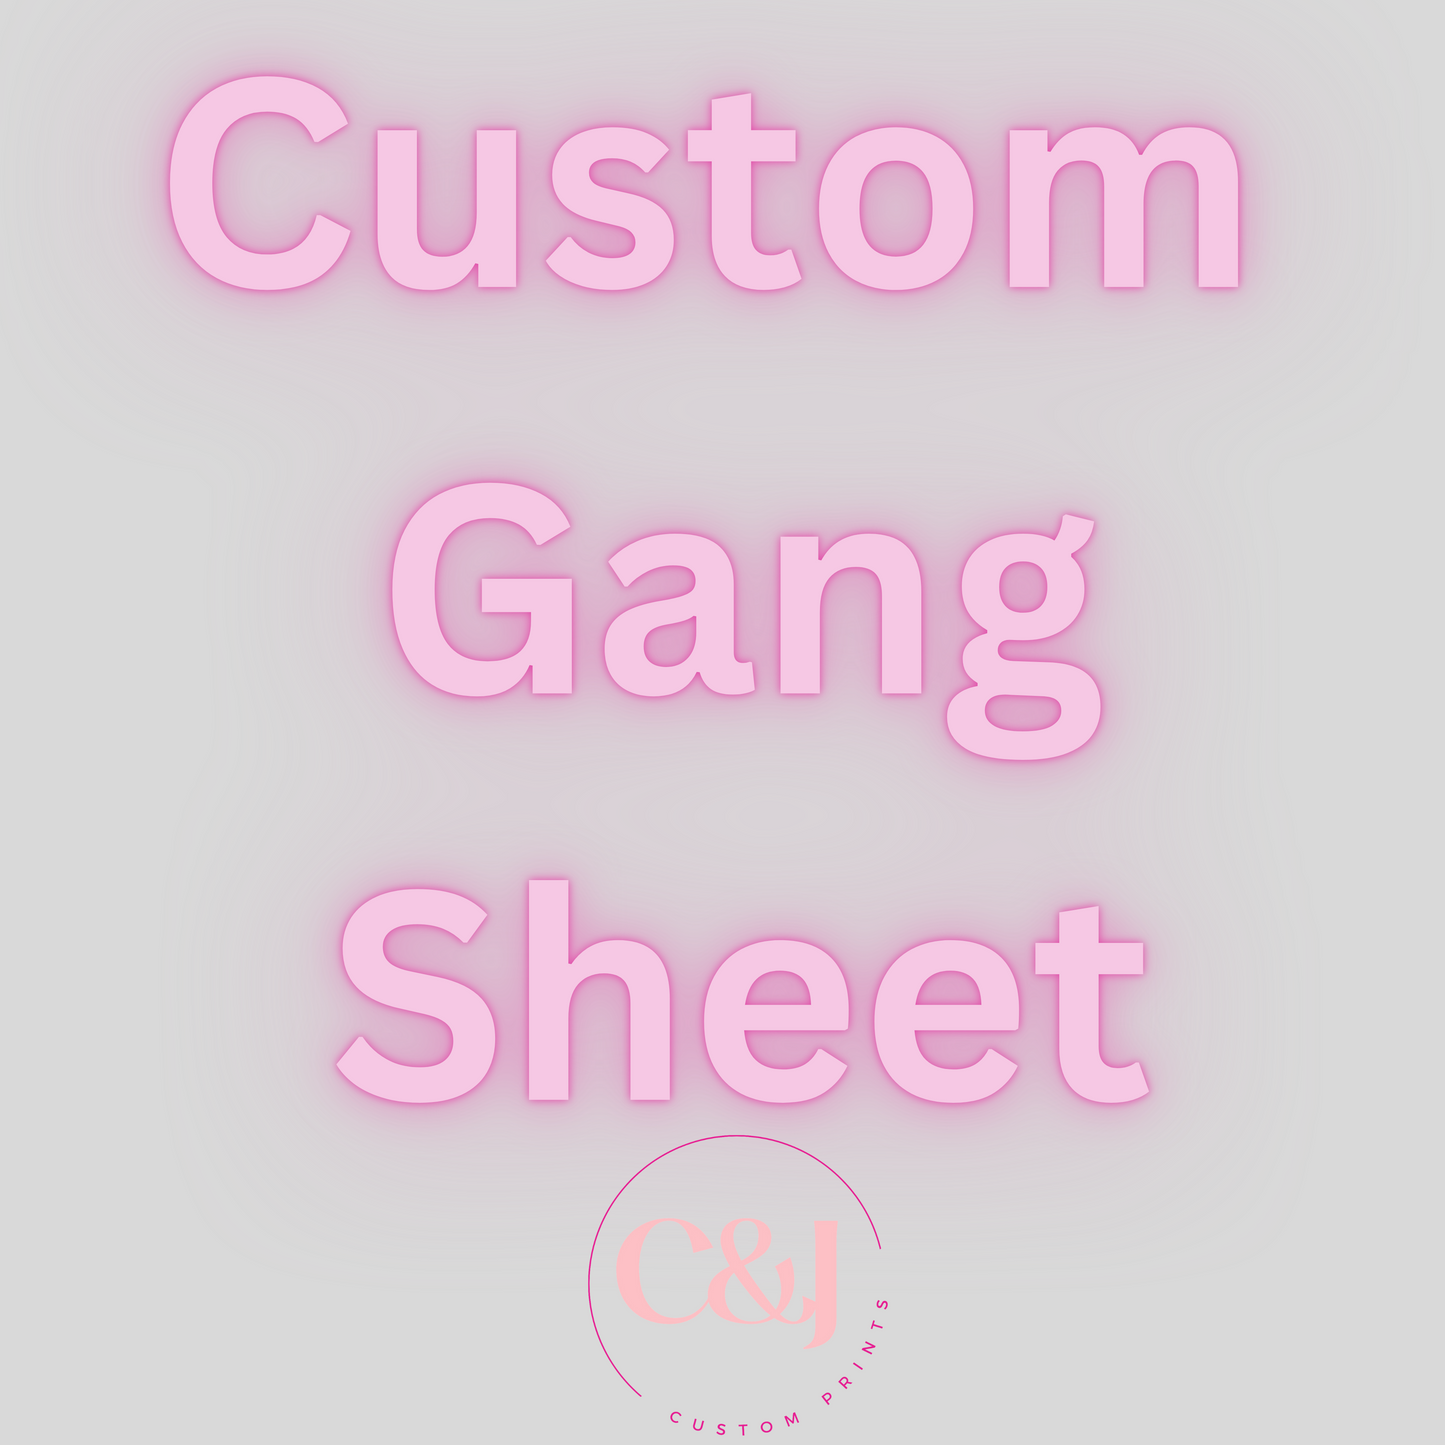 Gang Sheets-Upload your own file